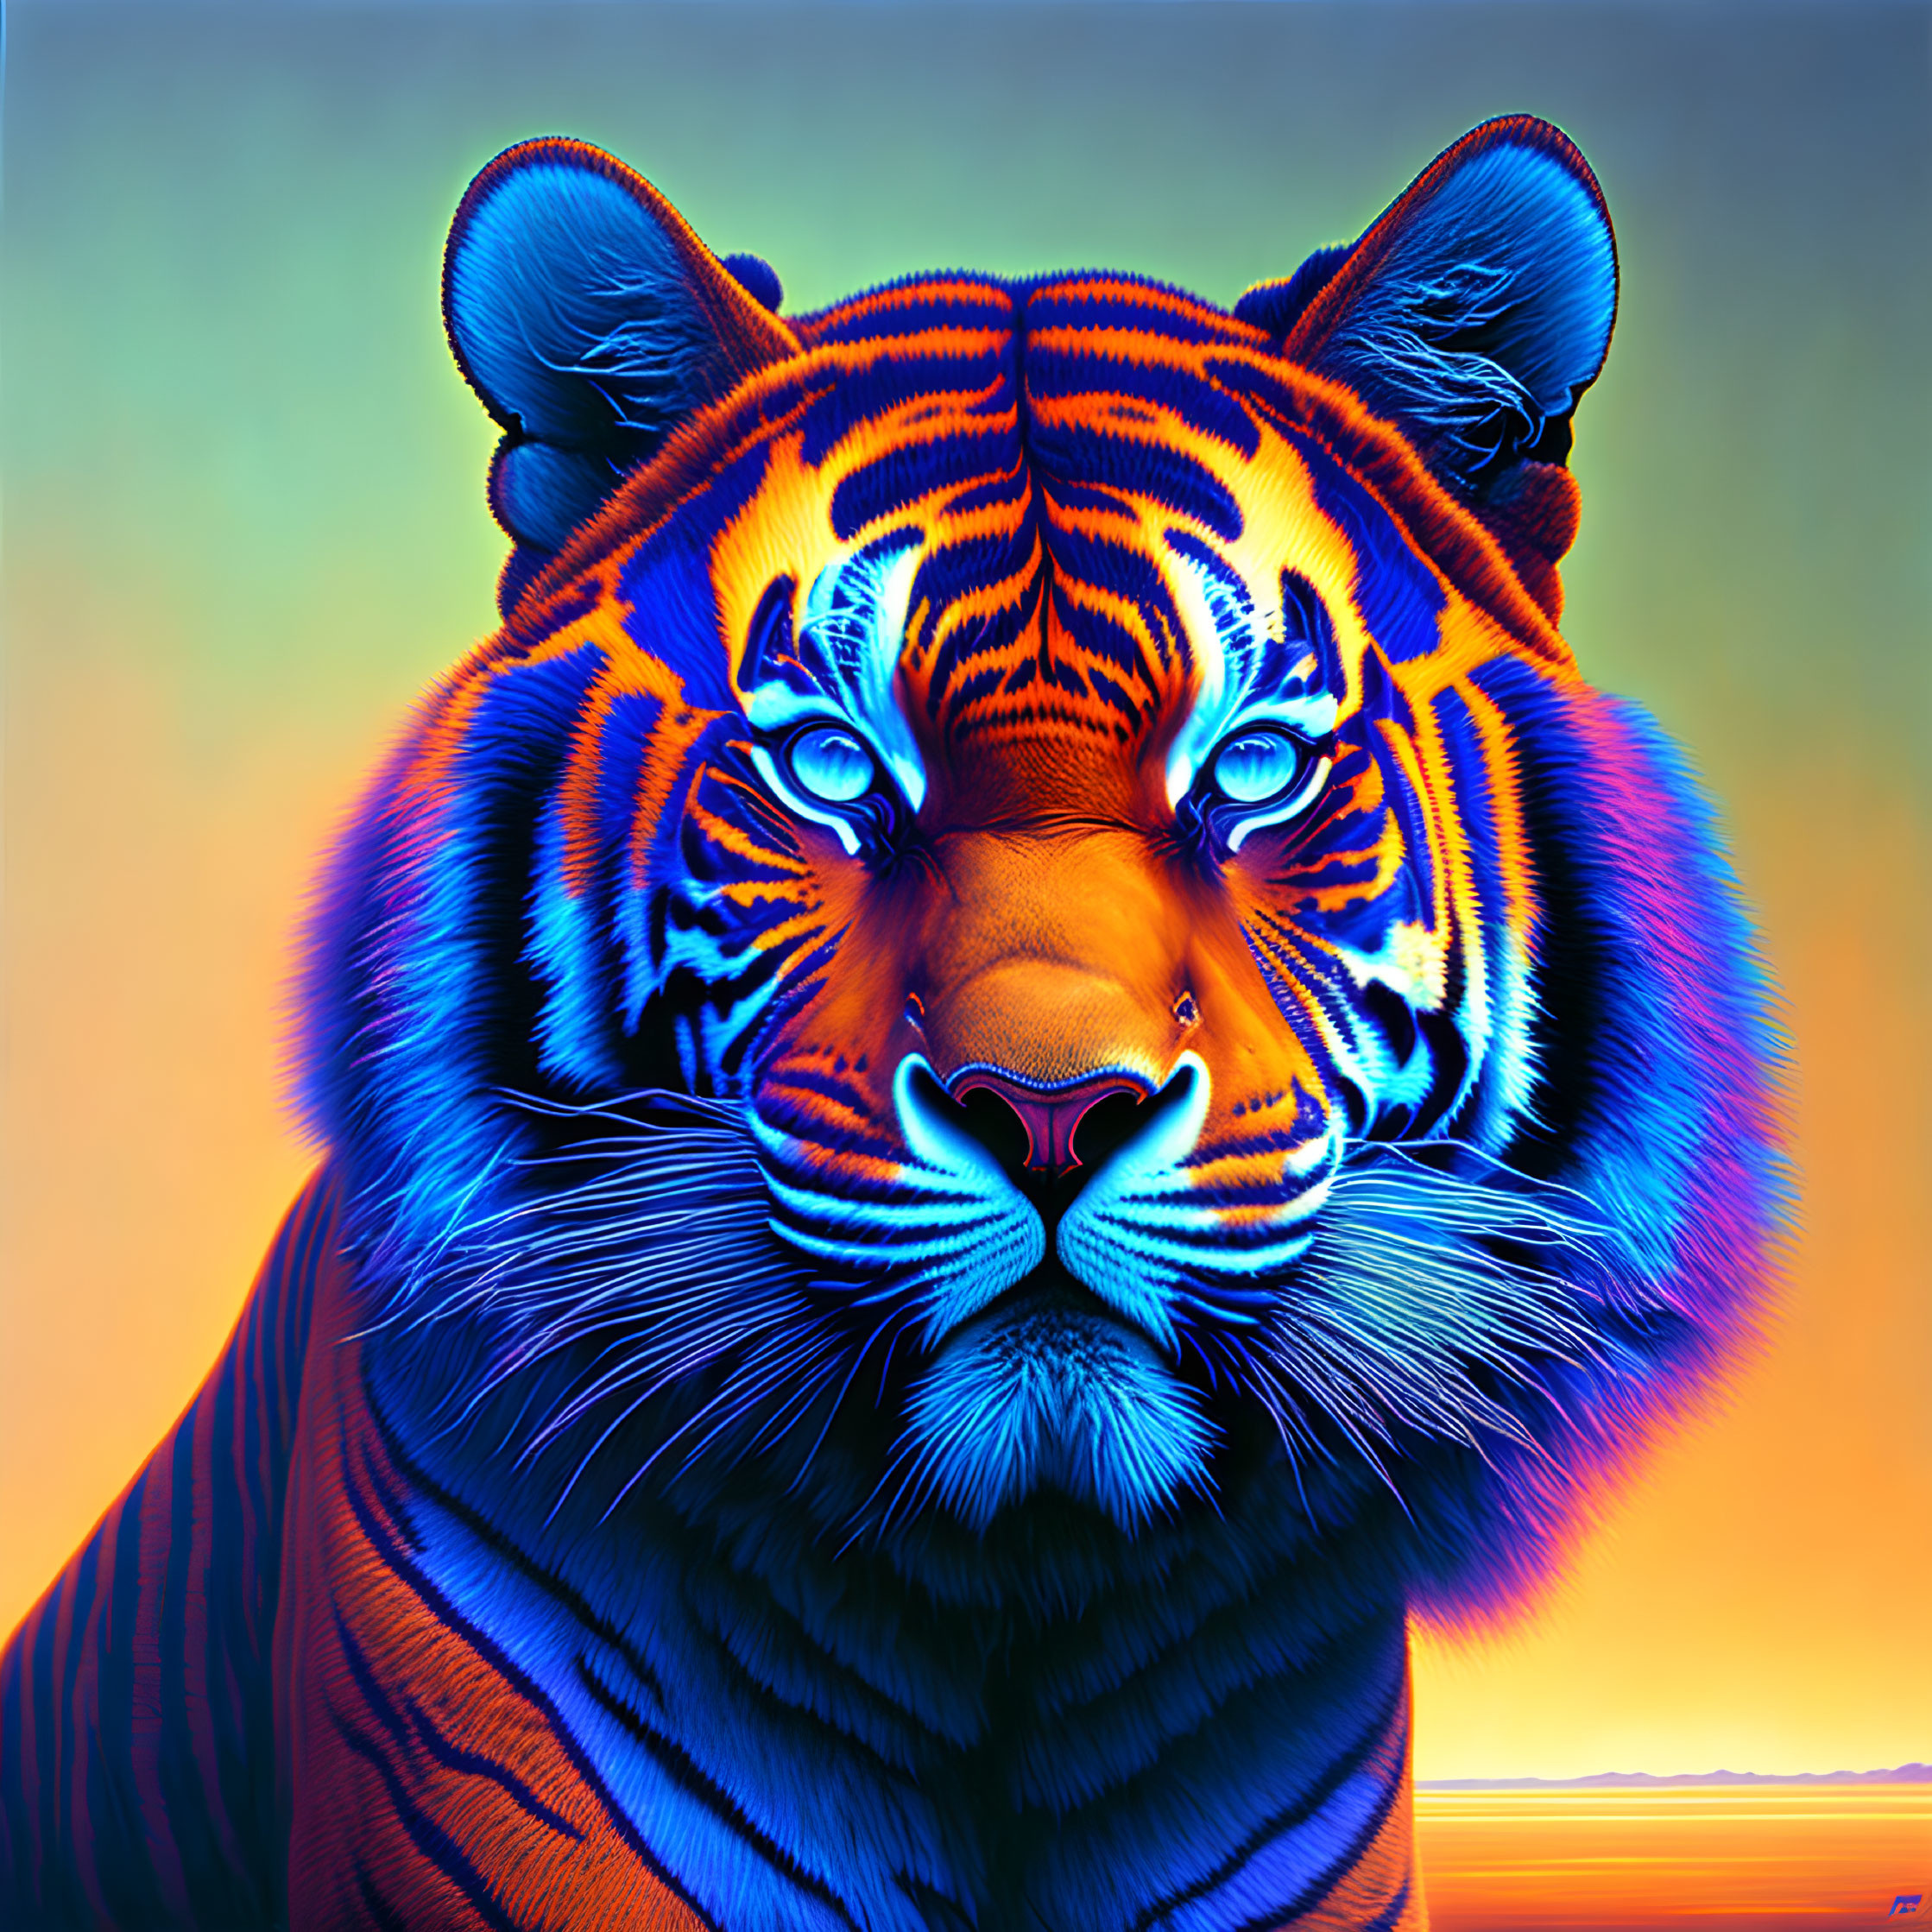 Colorful Tiger Face Art with Neon Hues & Detailed Fur Textures